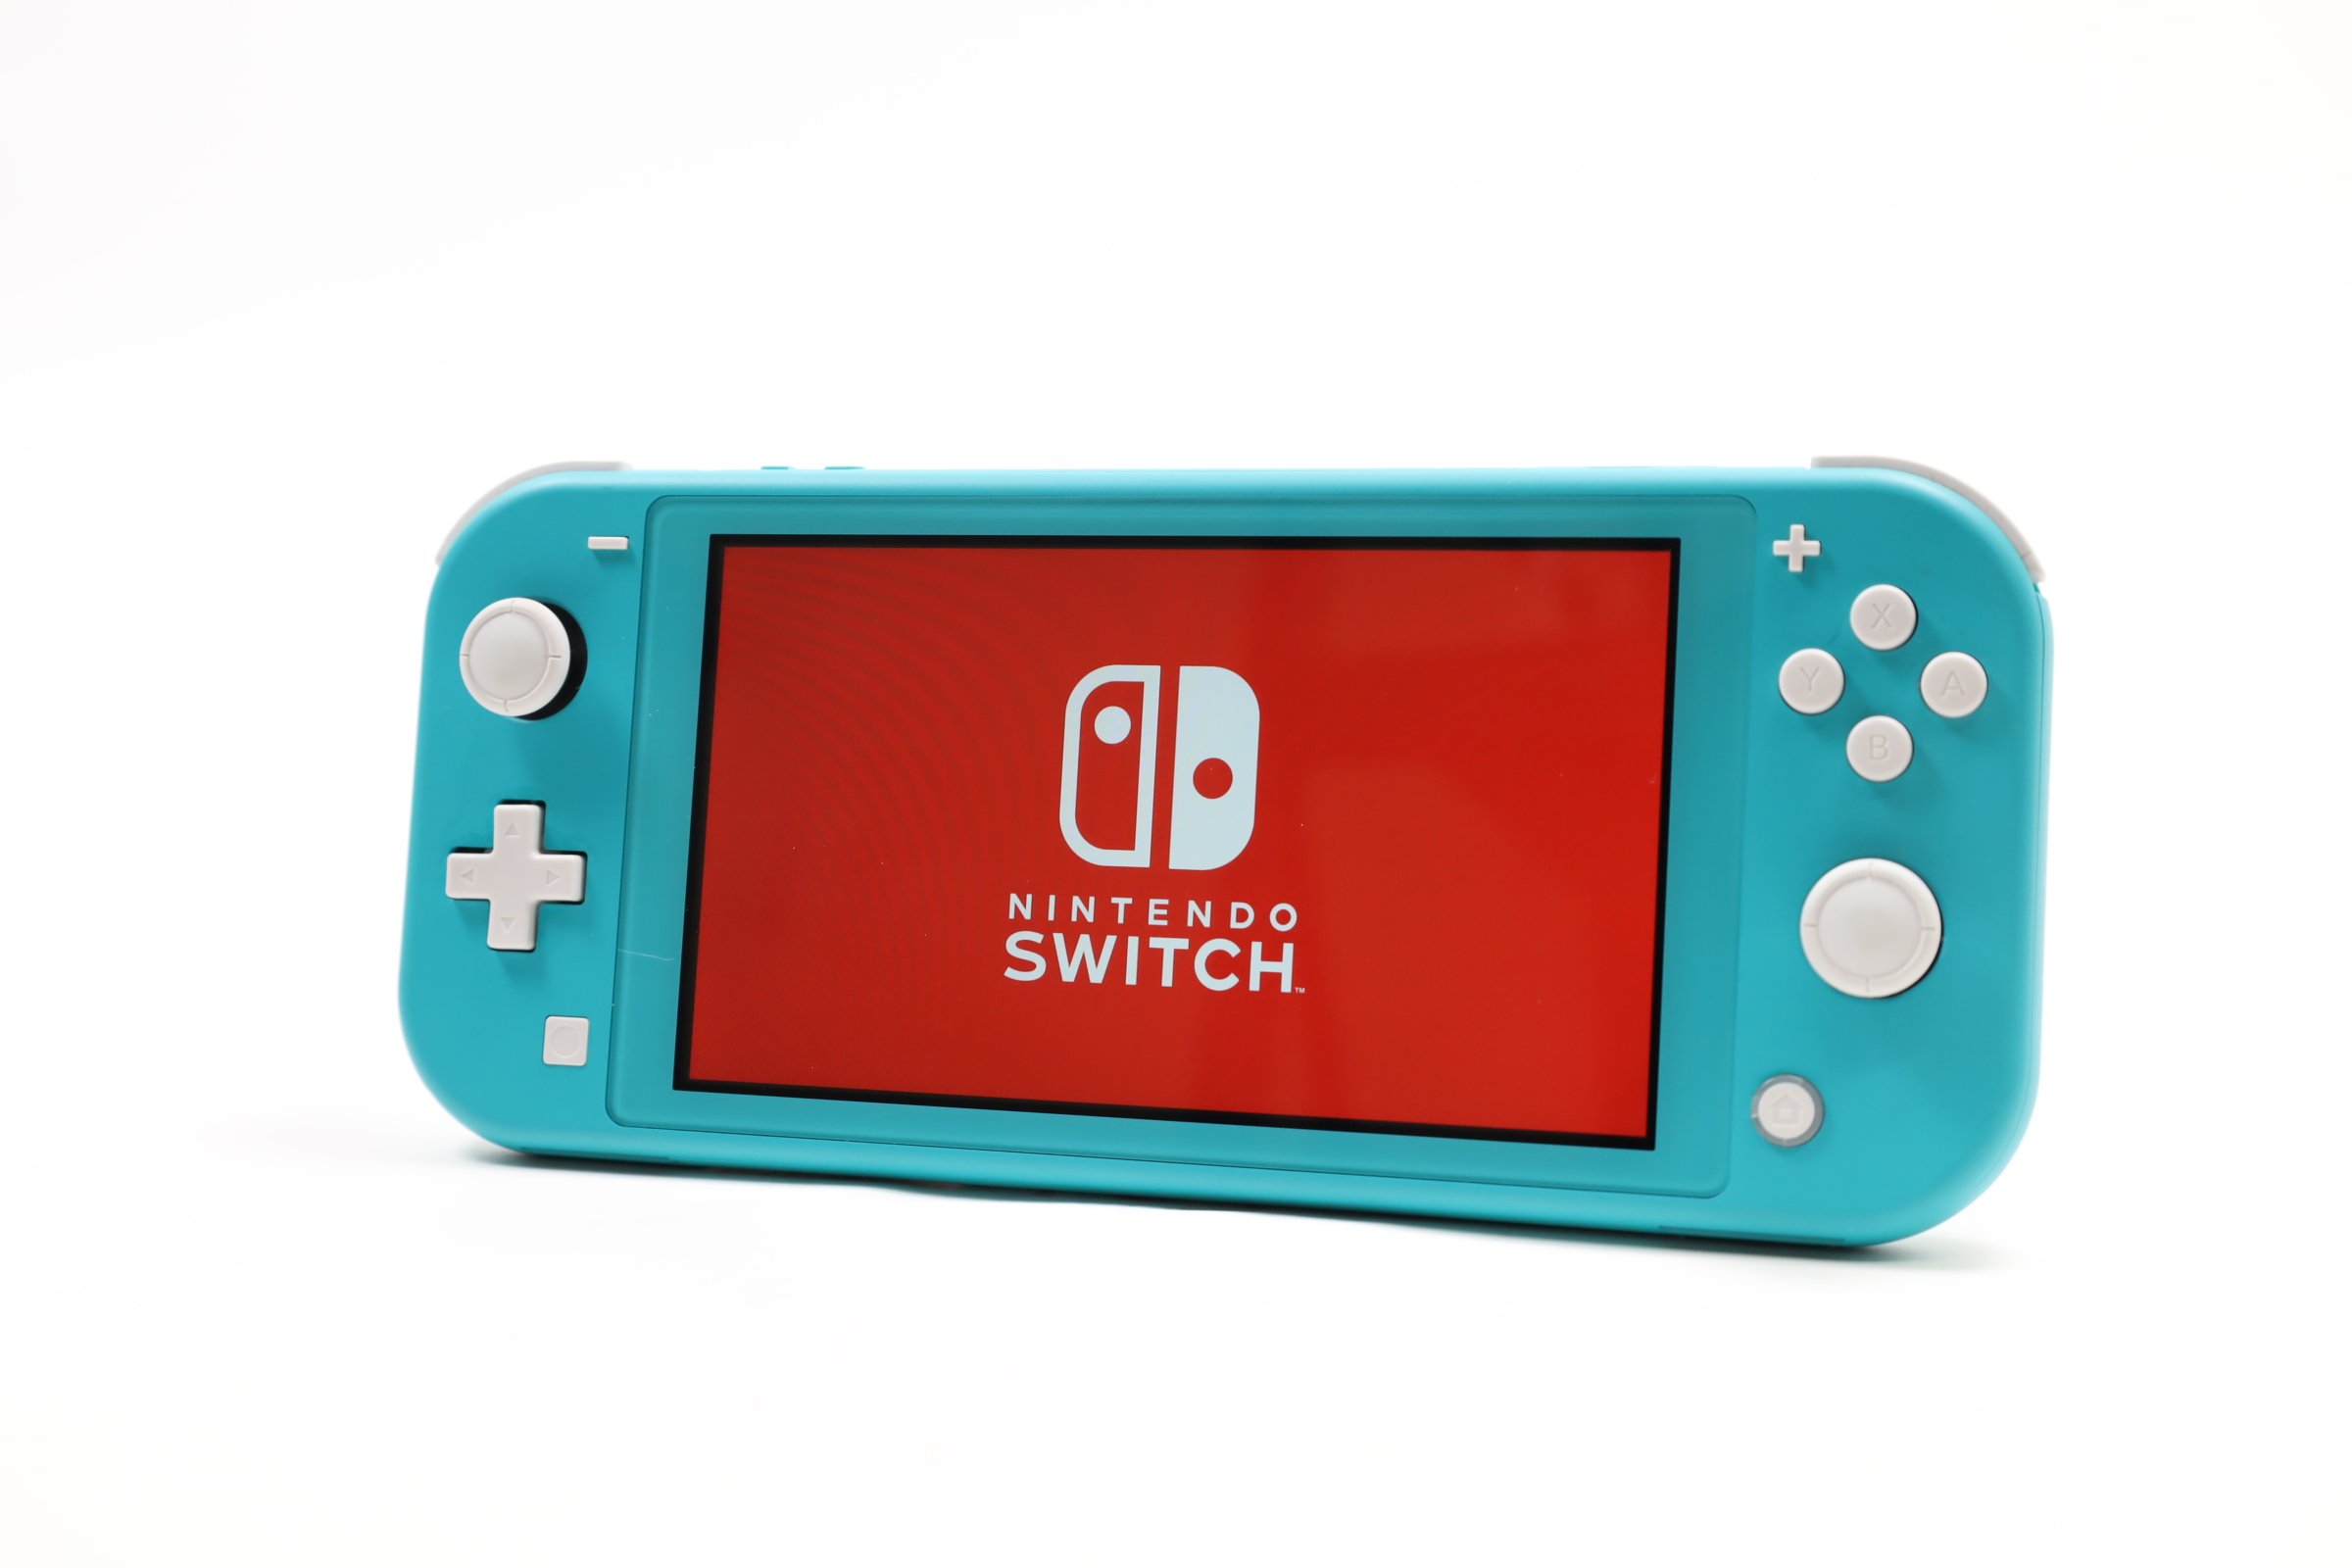 Nintendo Switch Lite 32GB Console - Turquoise for sale online